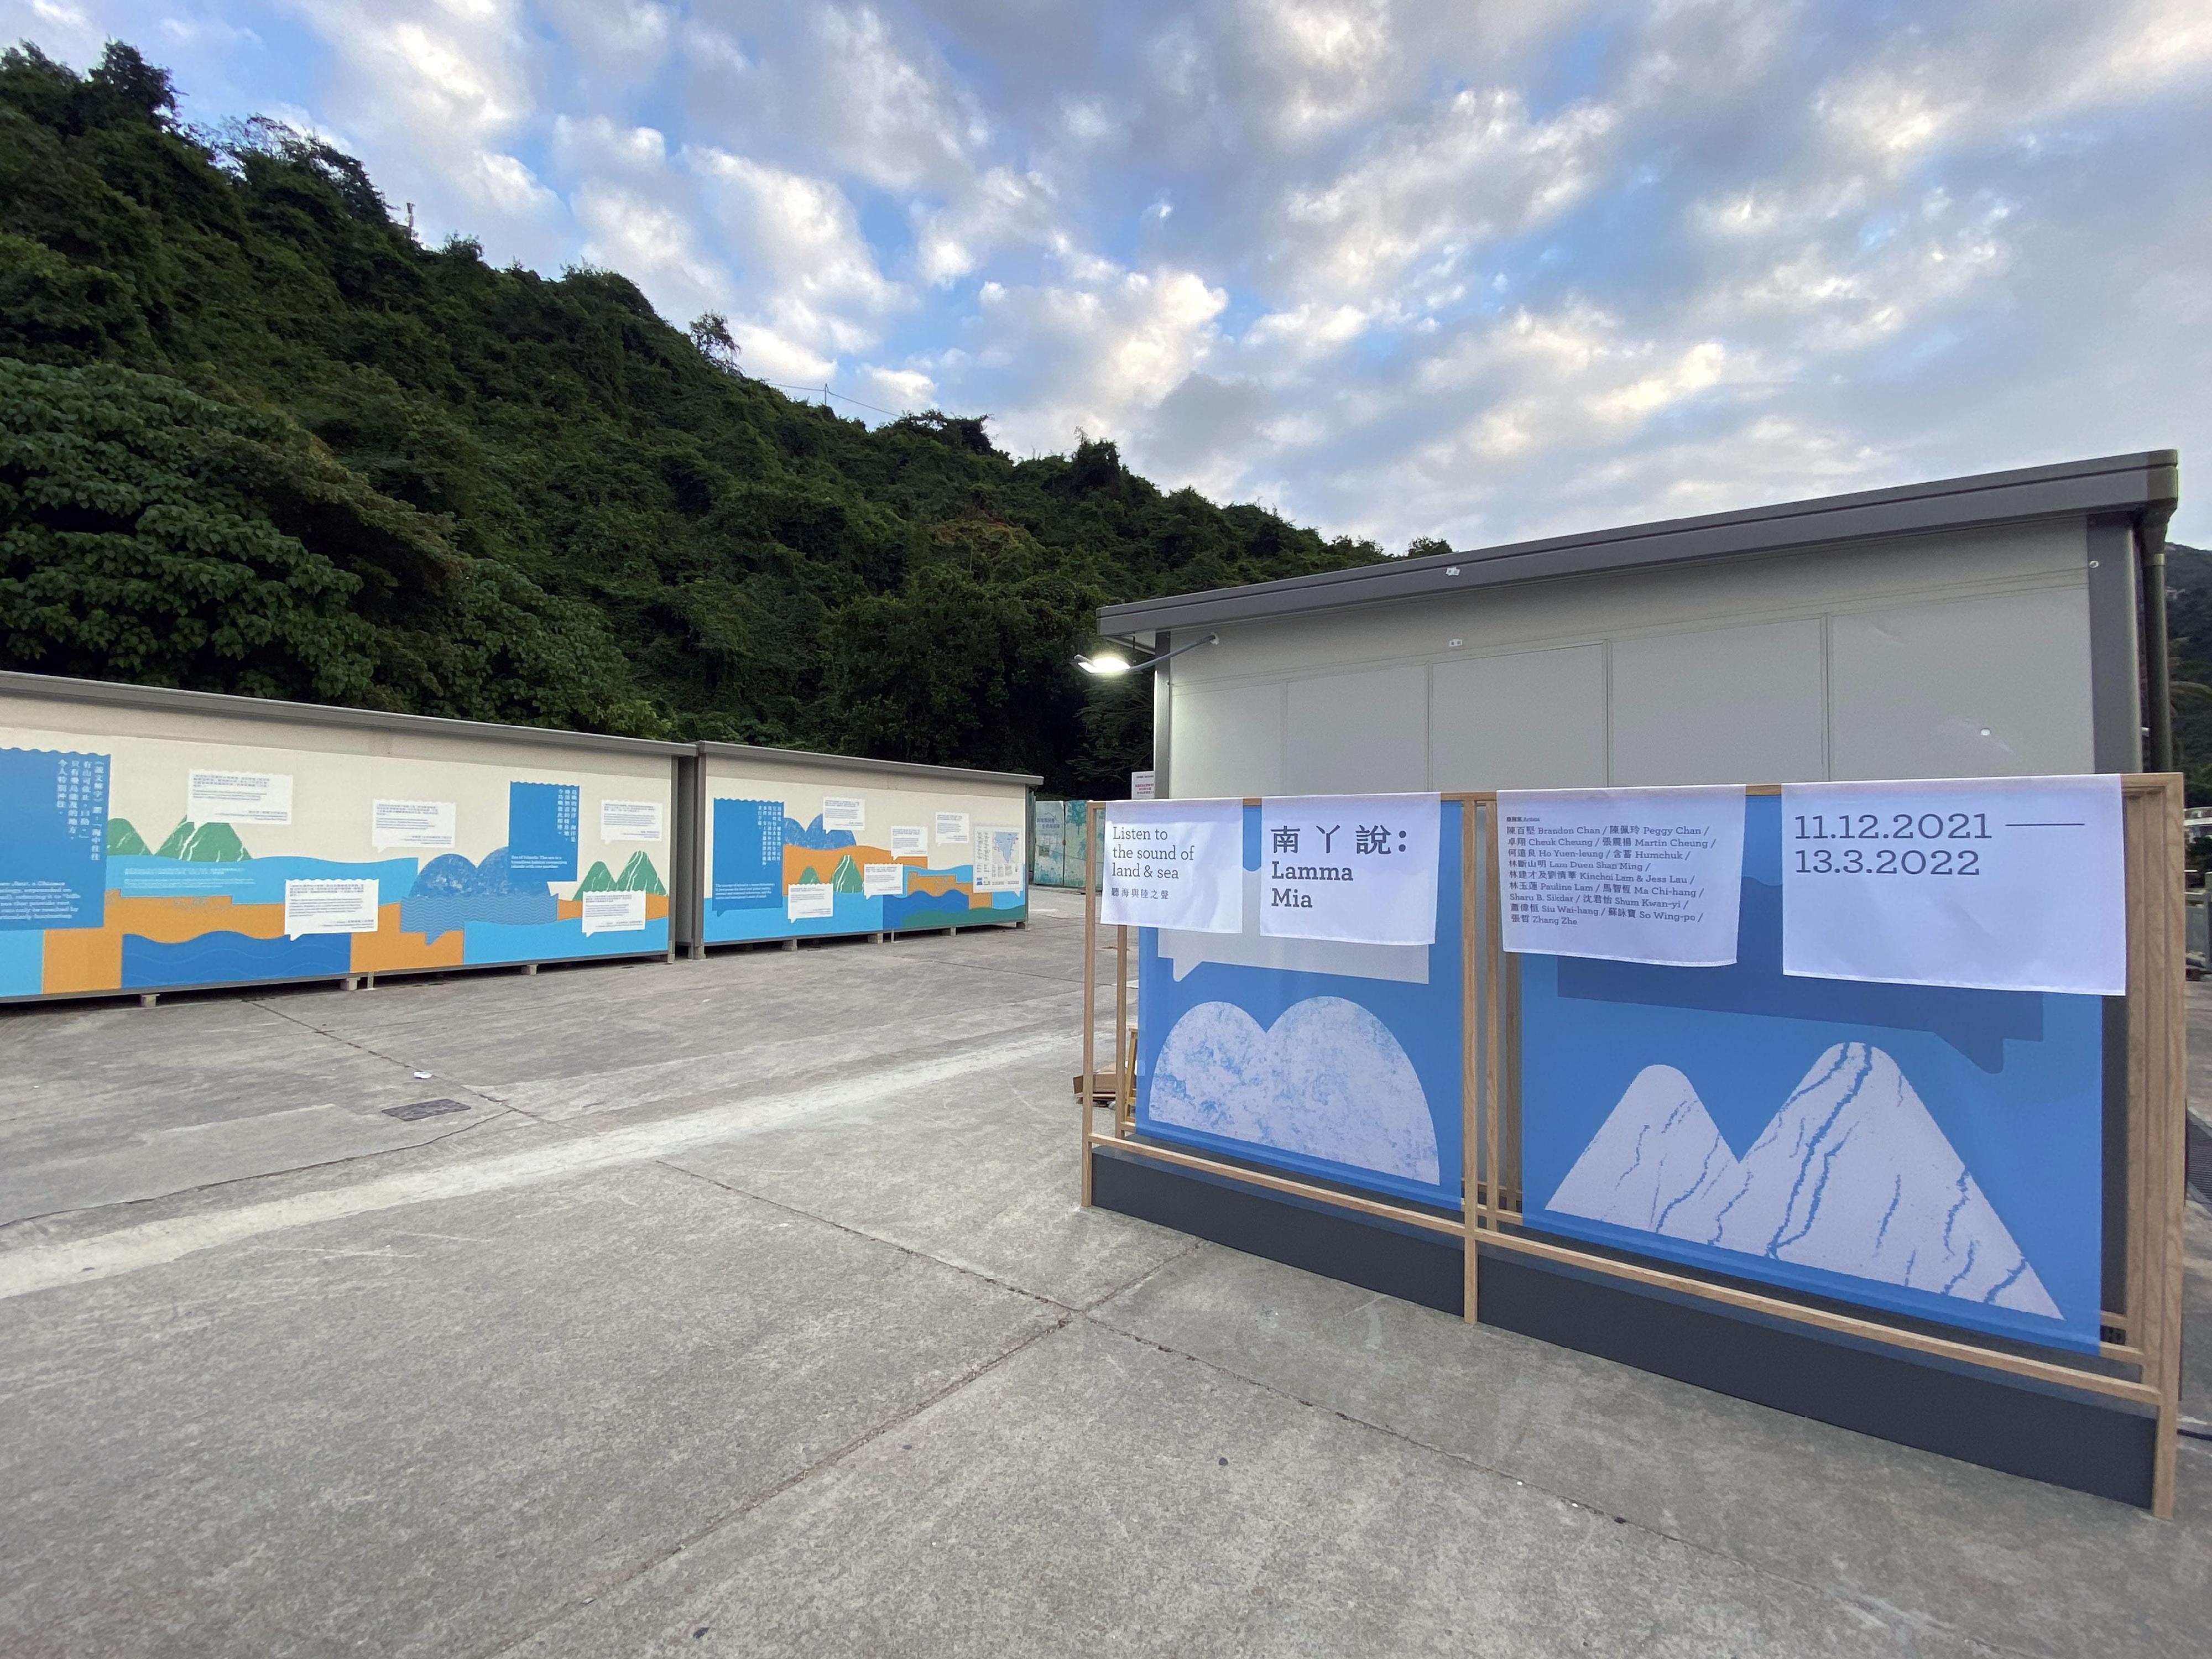 The “Lamma Mia” public art project organised by the Art Promotion Office was launched today (December 11) at Sok Kwu Wan, Lamma Island. Artworks are displayed at various locations on Lamma Island including the indoor exhibition space and screening houses at the forecourt of the Tin Hau Temple in Sok Kwu Wan.